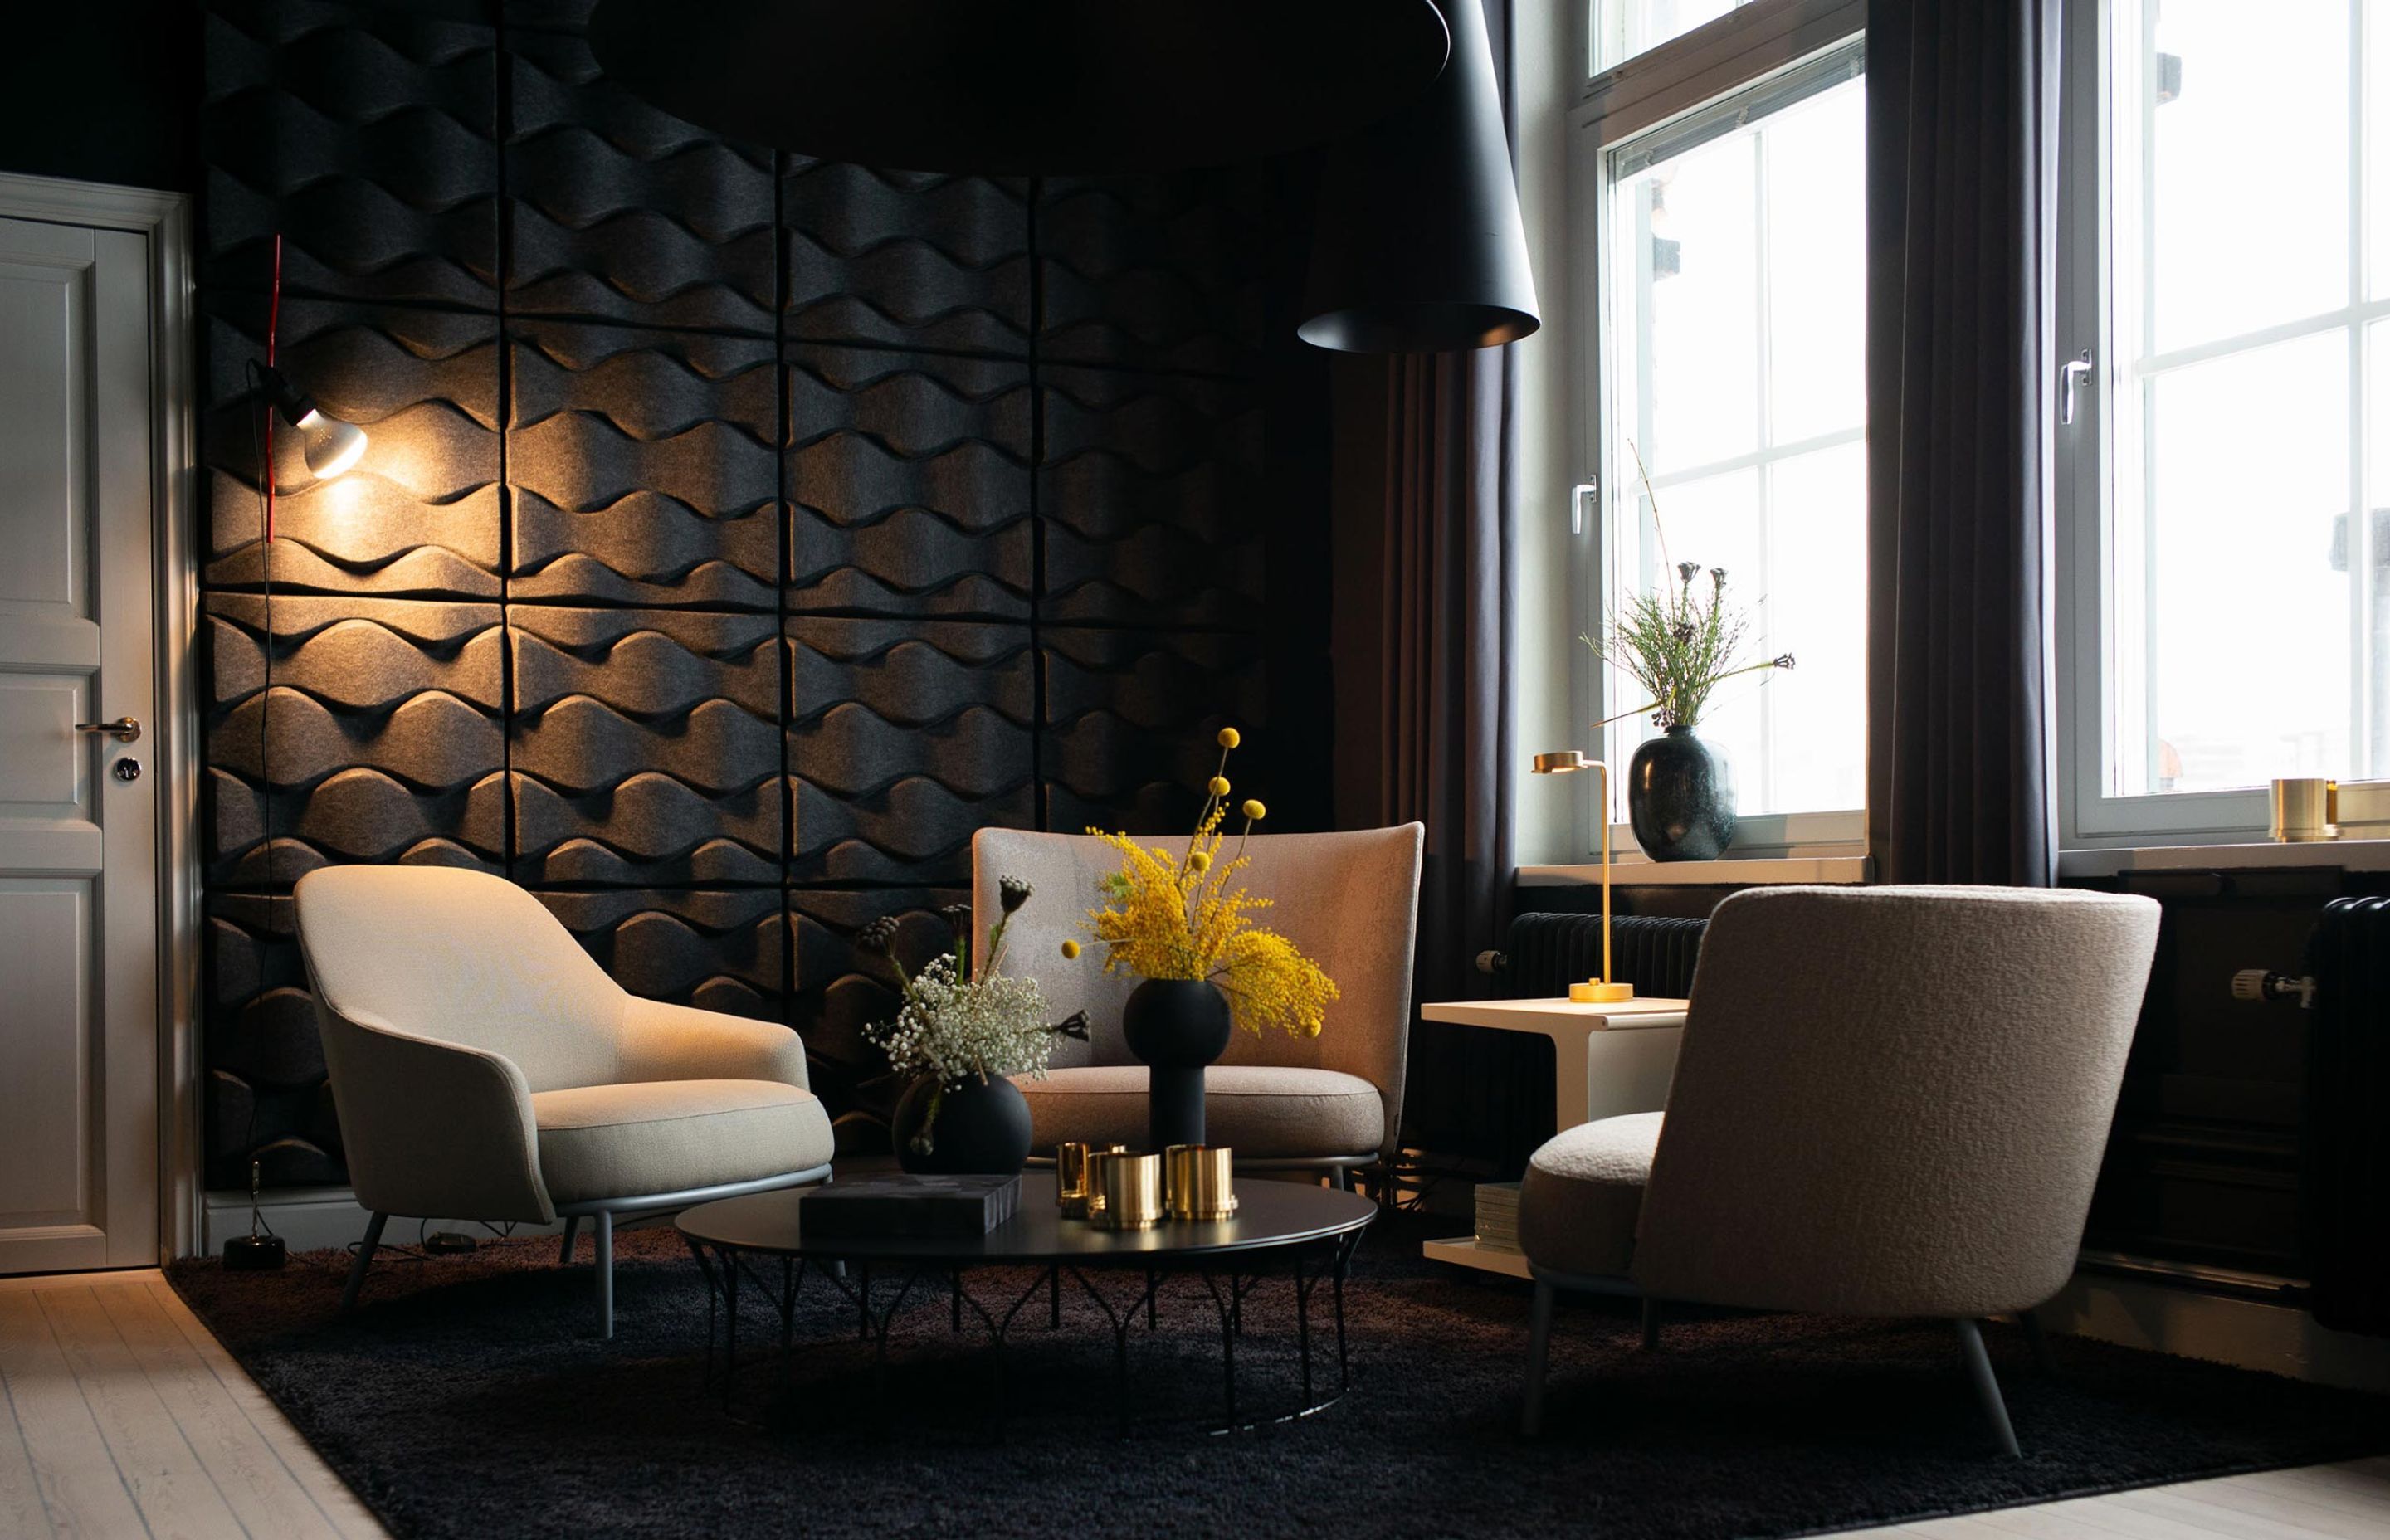 Looking for somethign a bit darker? why not try this alternative lounge space, featuring Offecct Soundwave® Flo, Acoustic panel